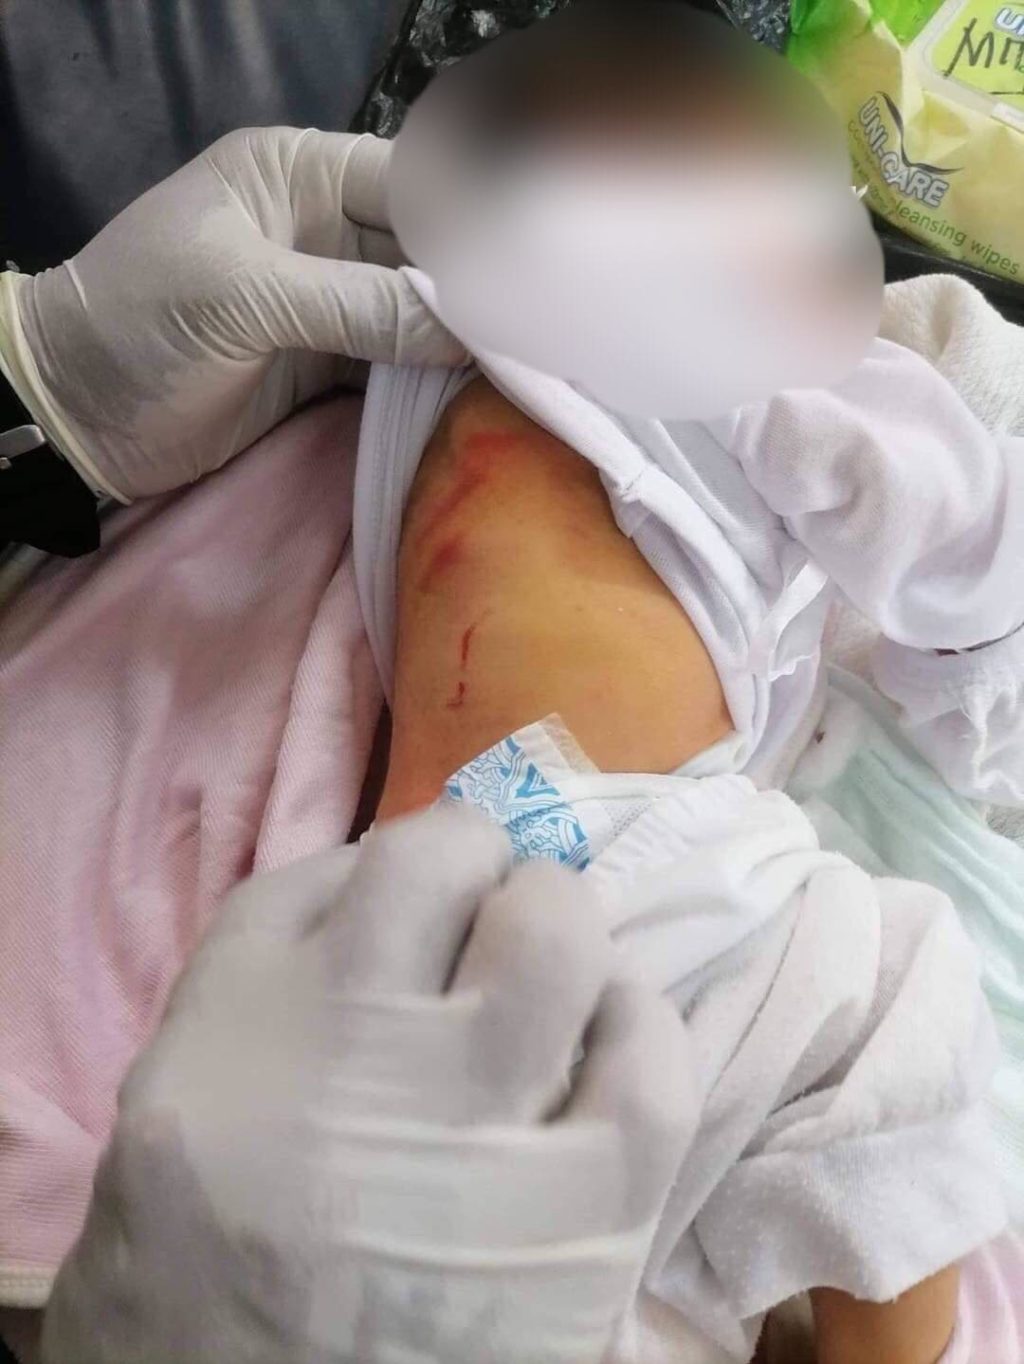 BABY GIRL RESCUED. Wounds at the back of the baby girl rescued at a vacant lot in Barangay Pajo in Lapu-Lapu City are believed to have been caused by animal bites. | Contributed photo via Futch Anthony Inso